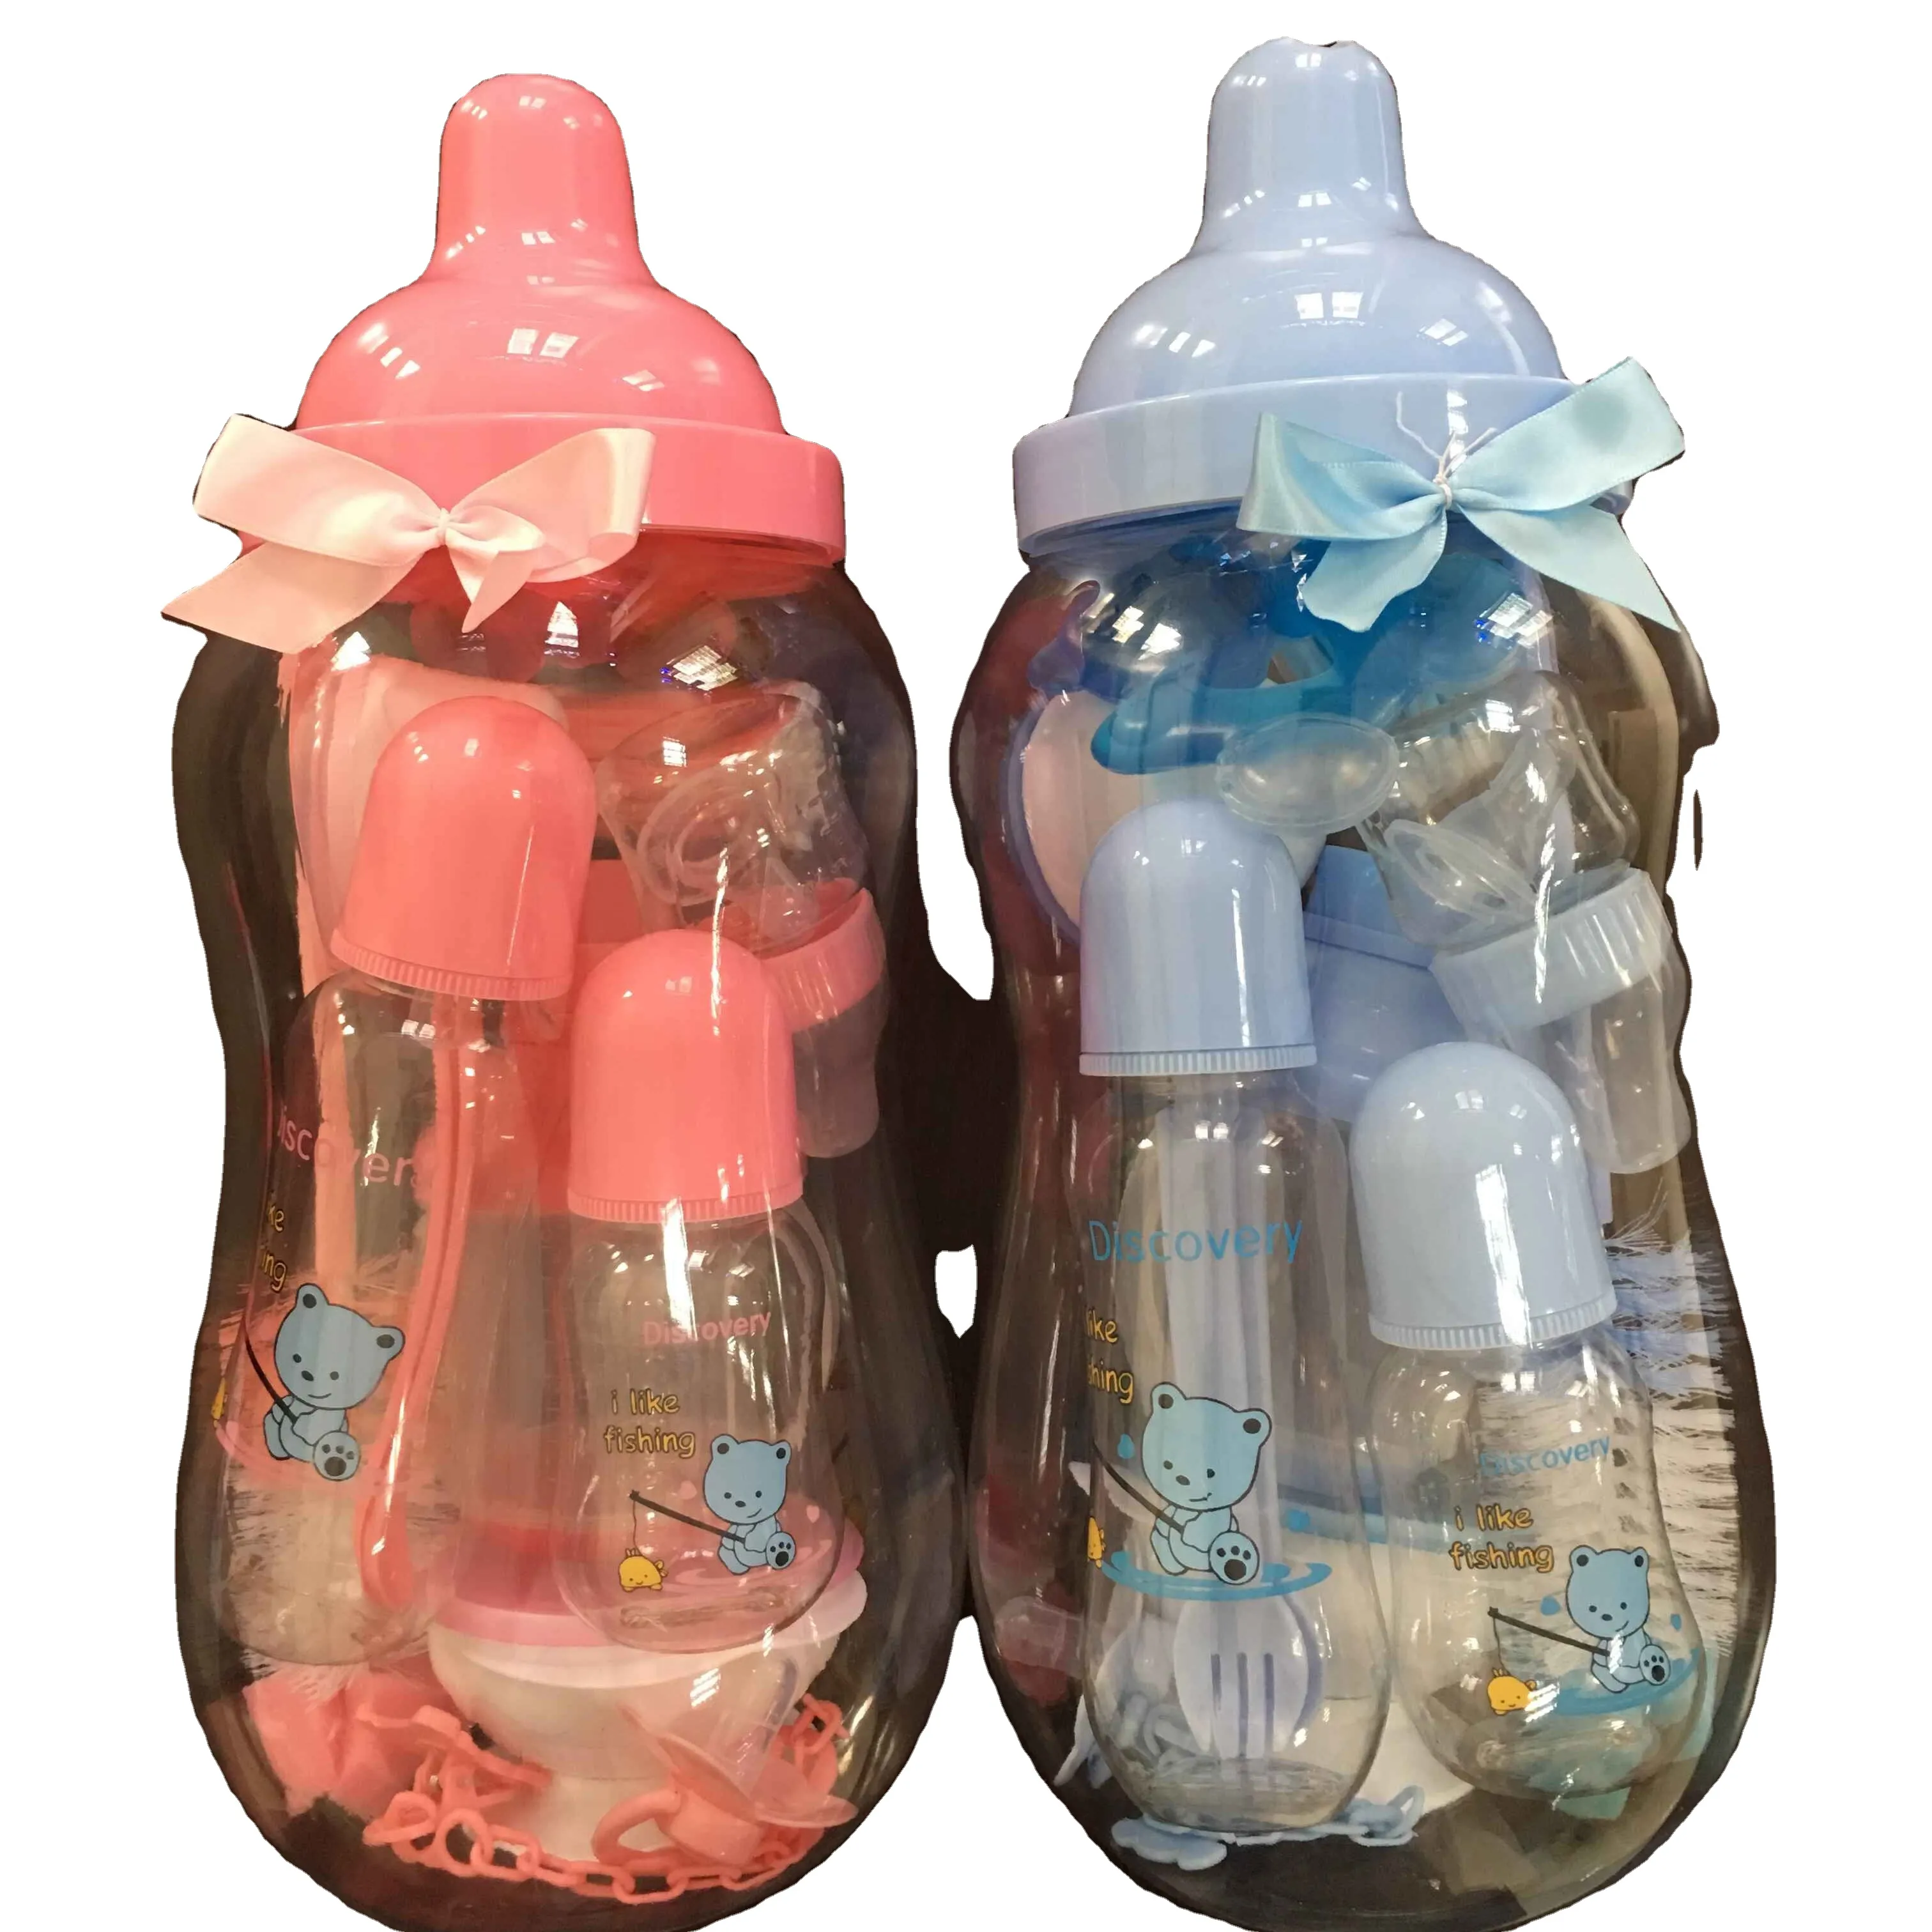 Amzaon Hot Selling High Quality Healthy Baby Feeding Bottles Sweet Cute PC Bottles Set For Babies